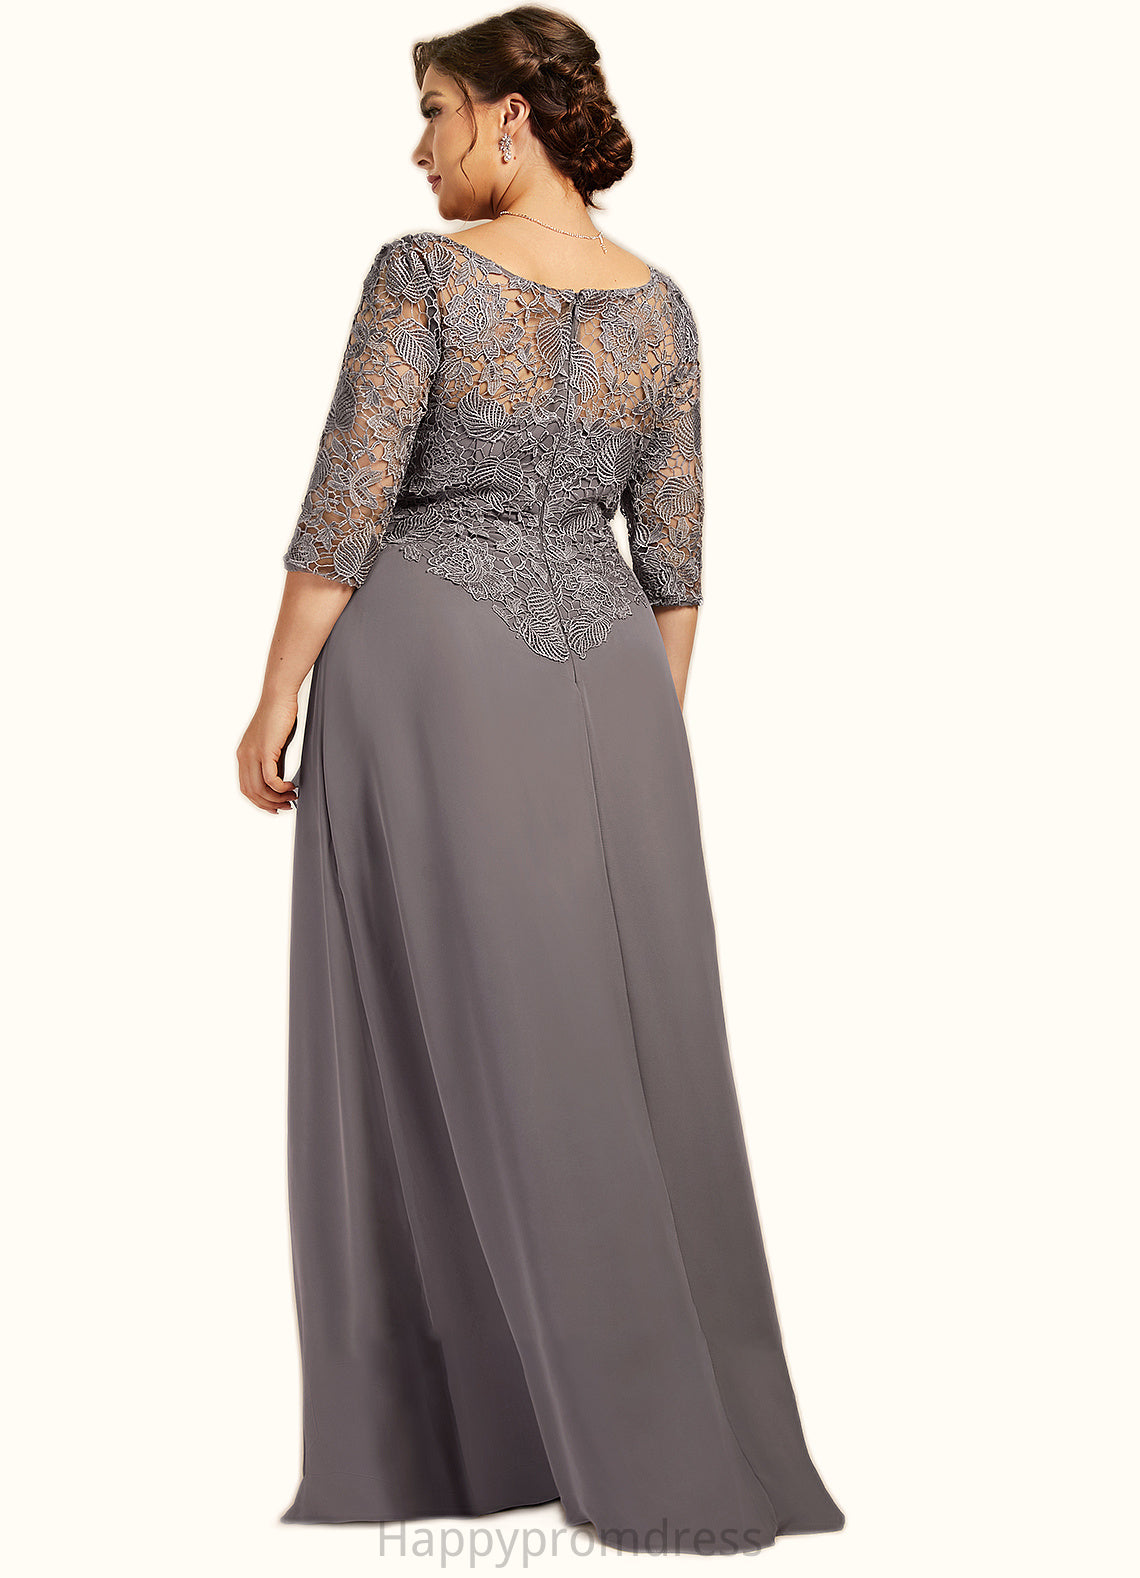 Ruby A-Line Scoop Neck Floor-Length Chiffon Lace Mother of the Bride Dress With Cascading Ruffles XXS126P0014608